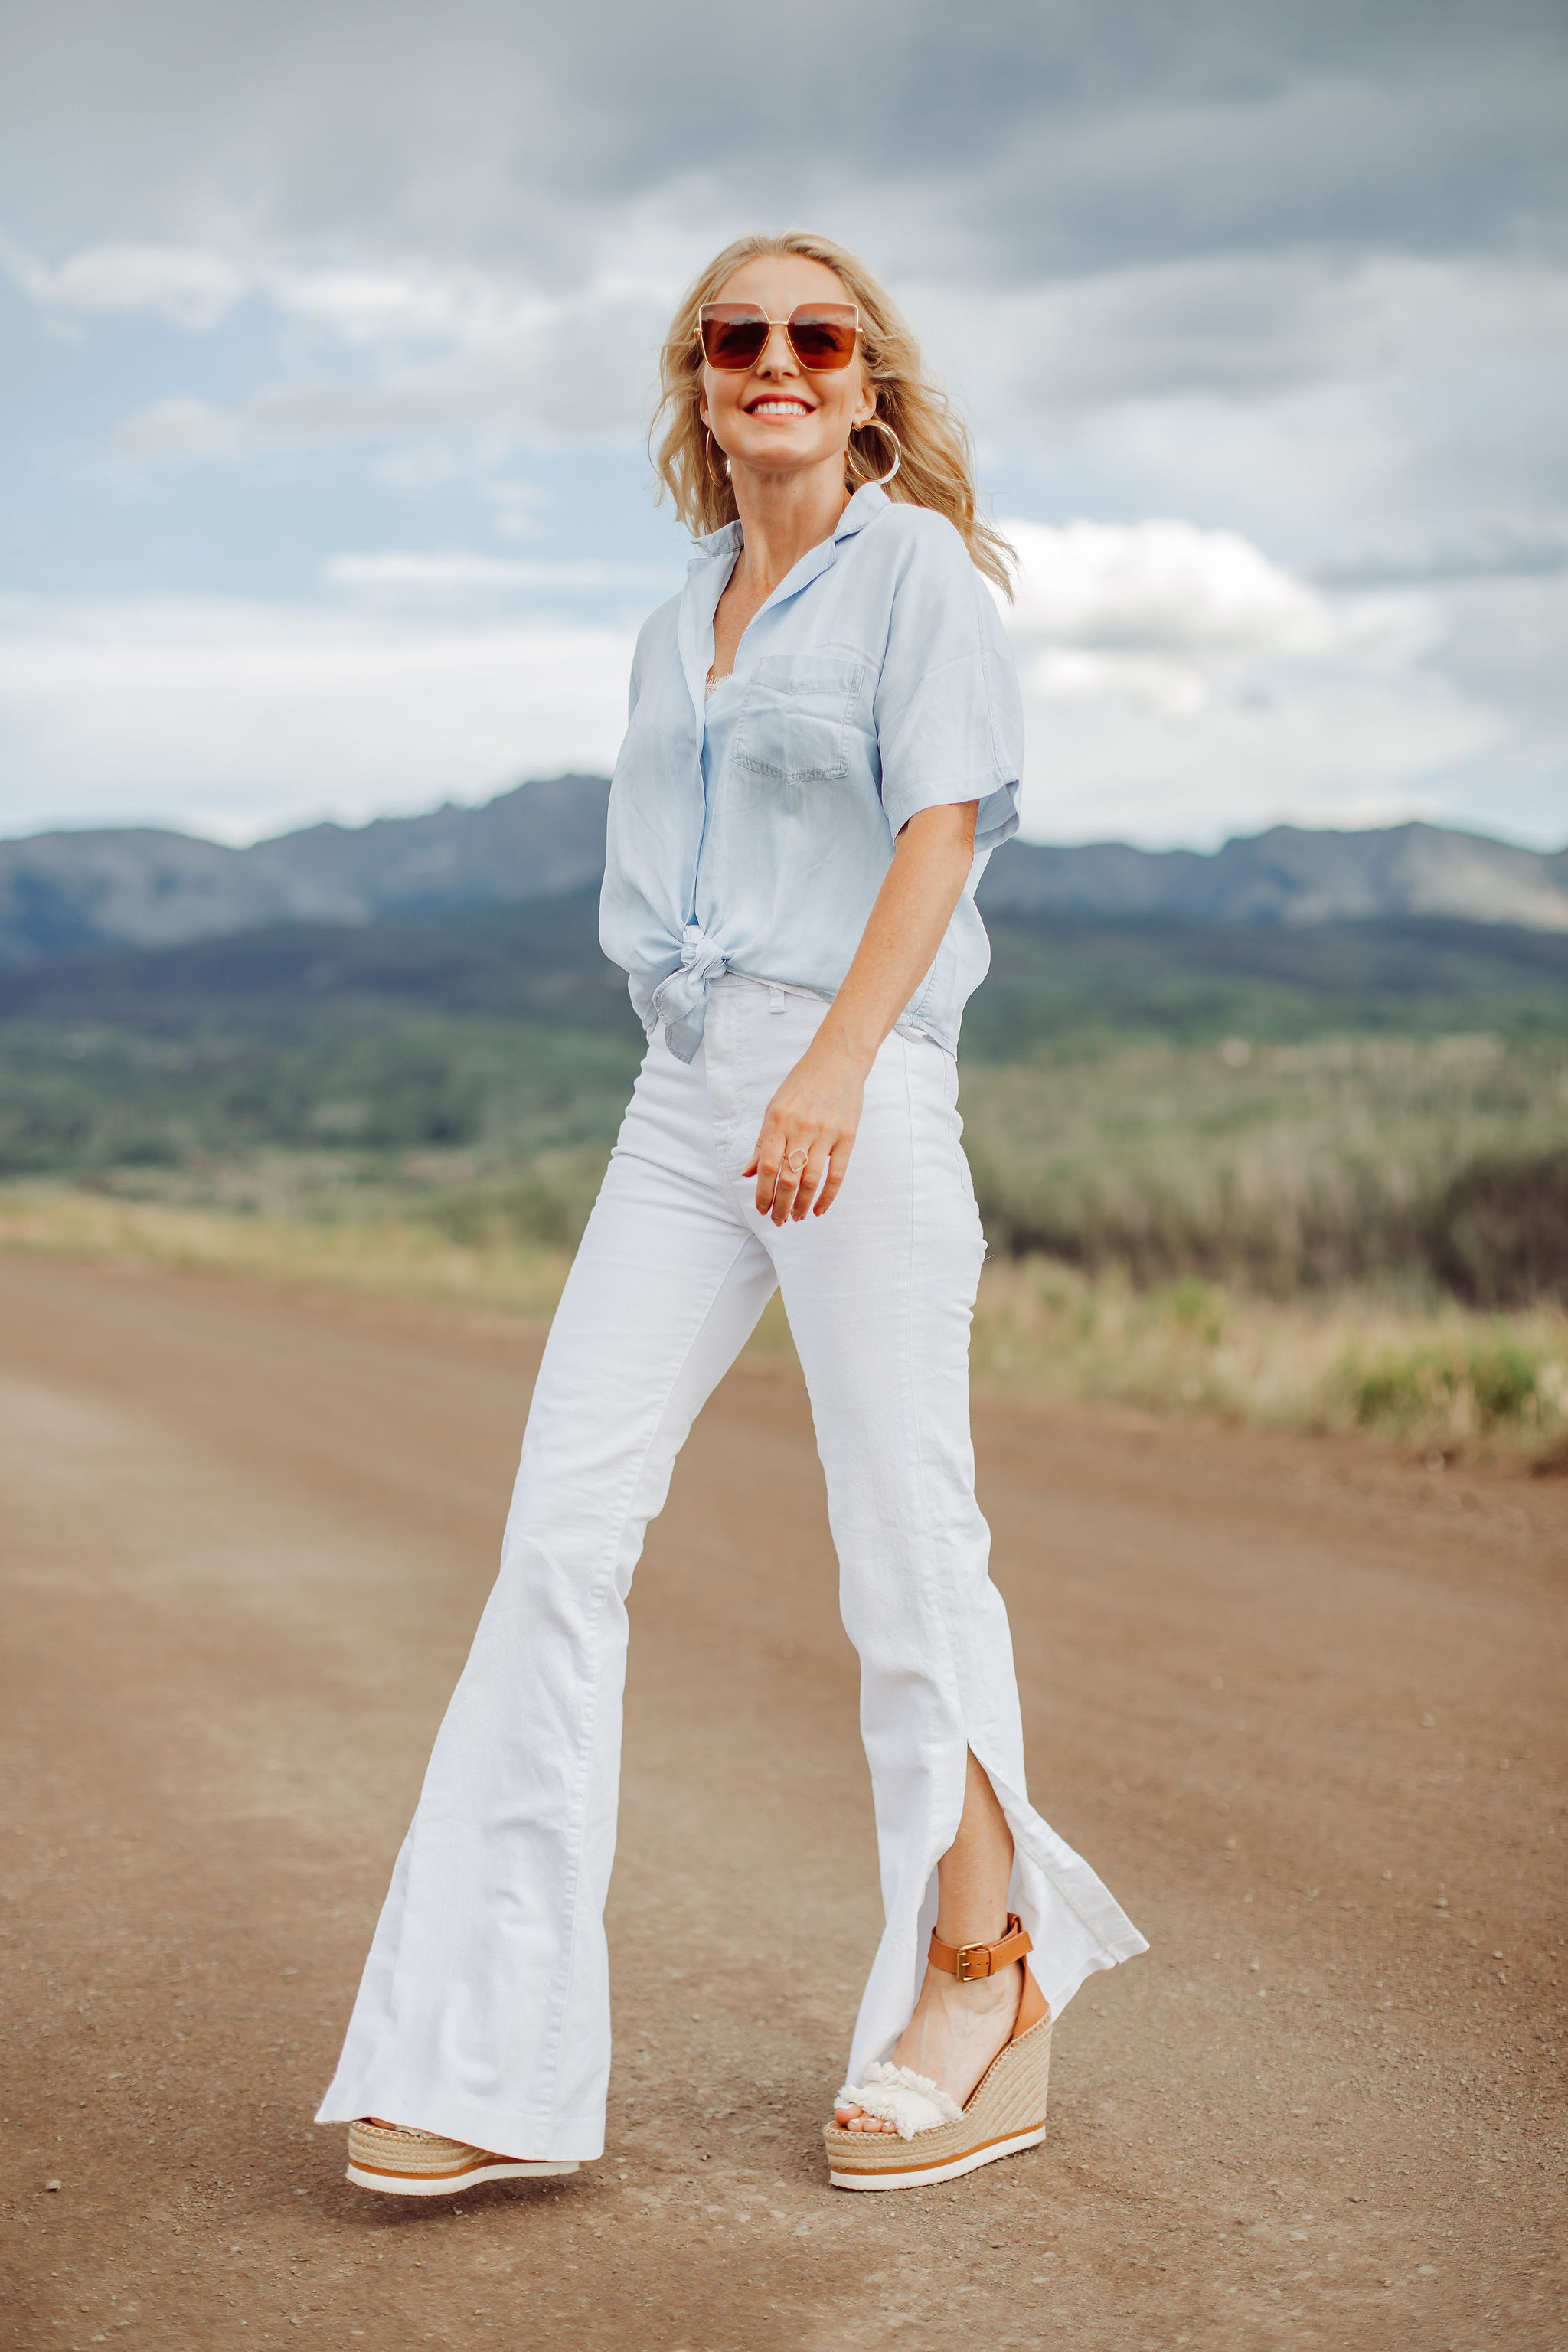 Blouses That Cover Arms, Fashion blogger Erin Busbee of Busbee Style wearing a blue tie-front button down shirt by Rails with high waisted white slit hem jeans by 7 For All Mankind and See by Chloe wedges and Saint Laurent sunglasses in Telluride, Colorado